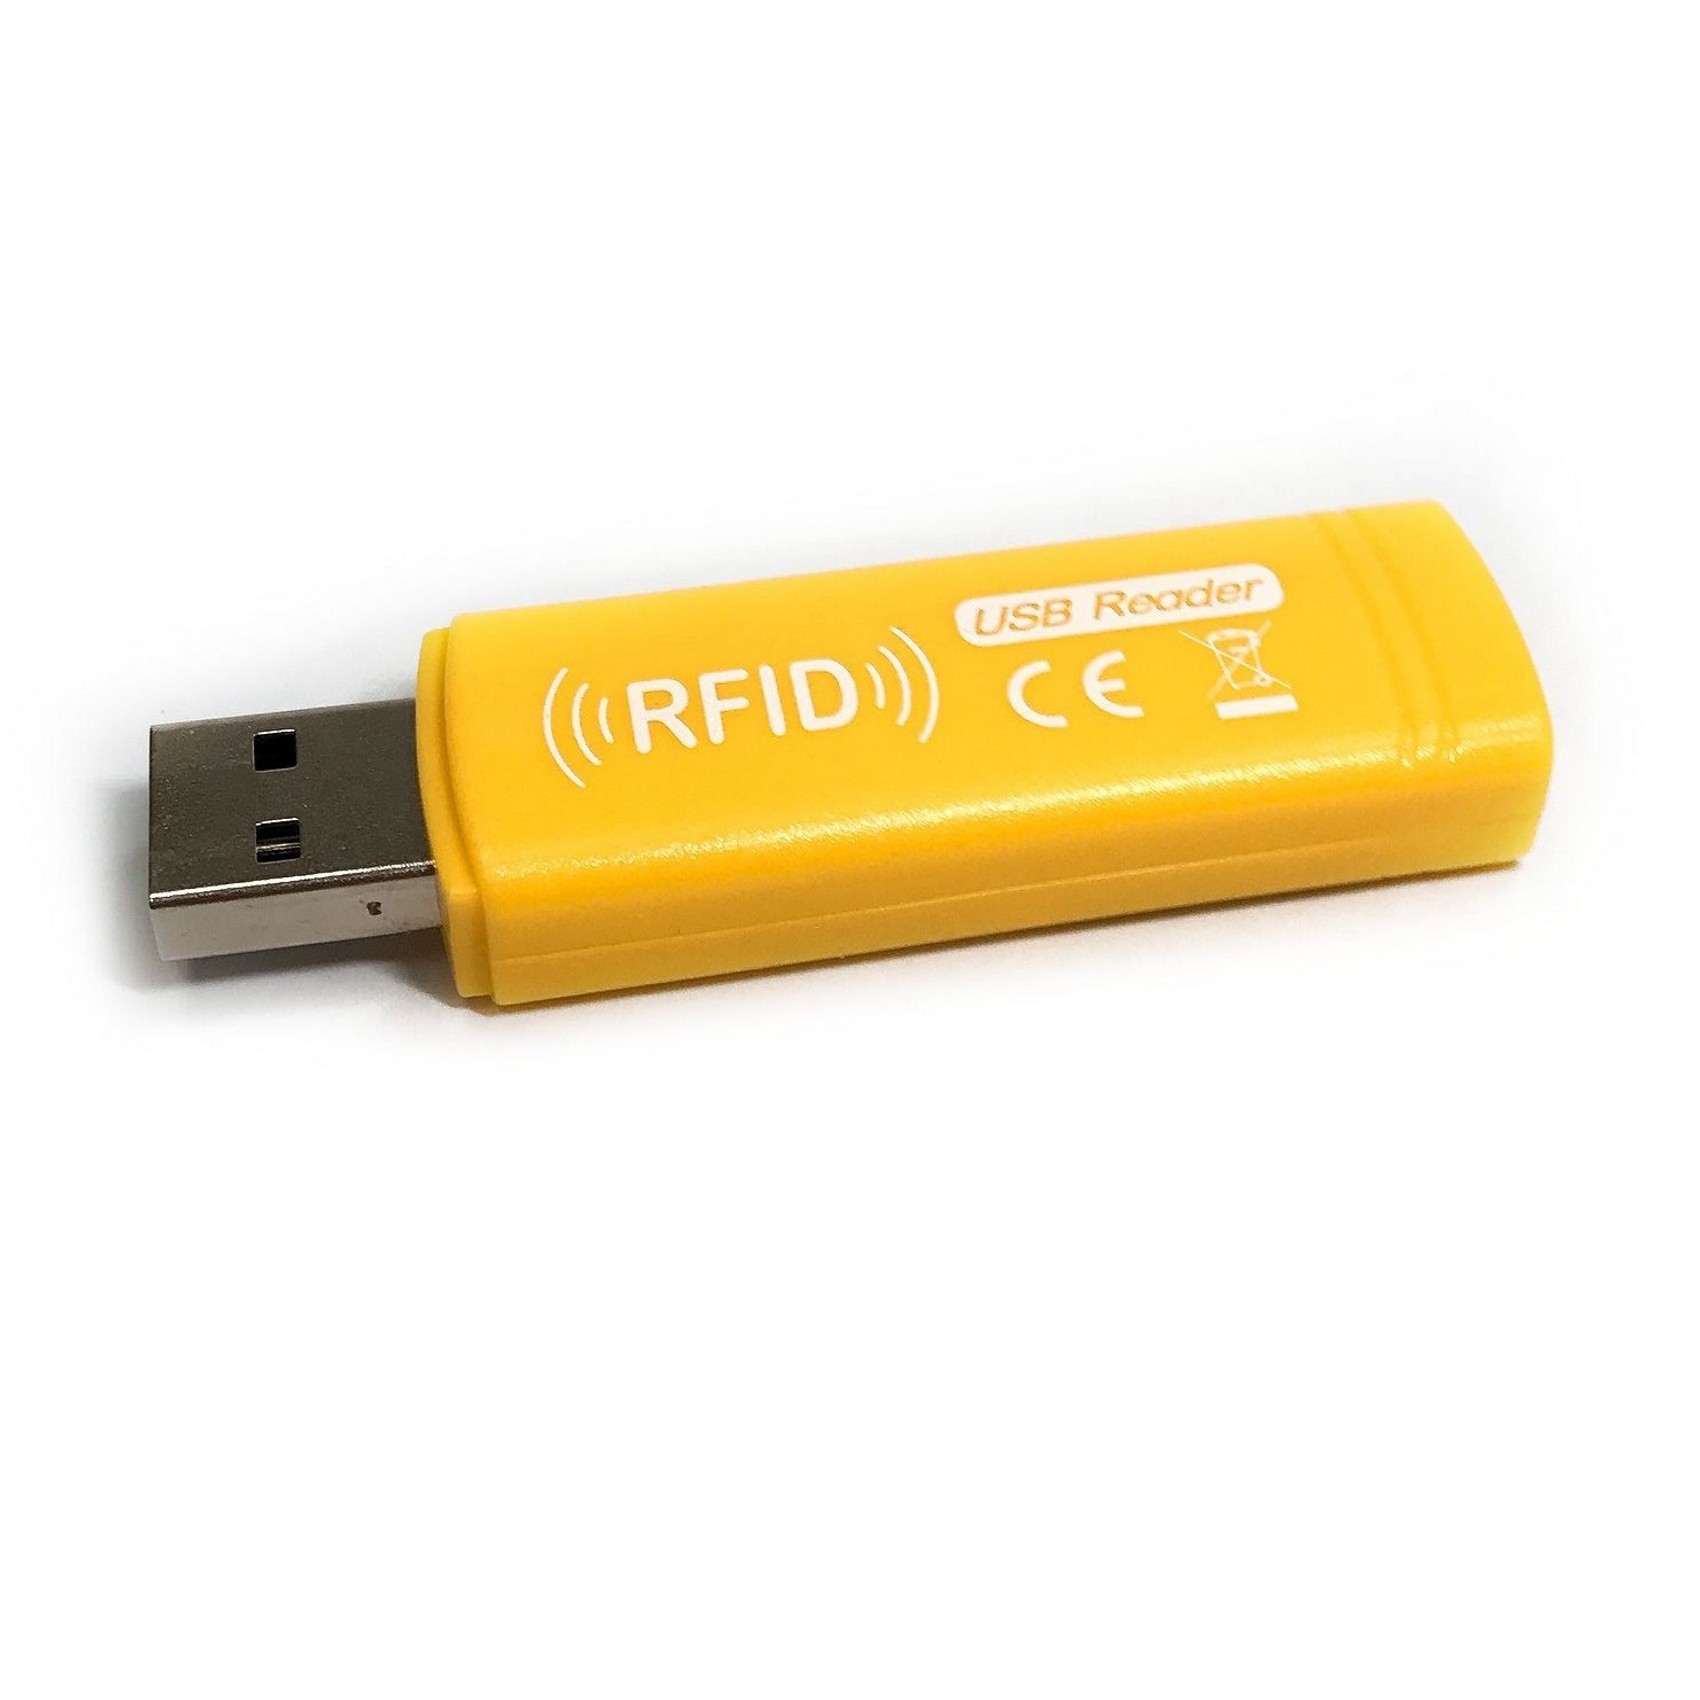 USB PEN READER 13.56MHz, ISO 15693, ICode, TI and Infineon Transponder or compatible